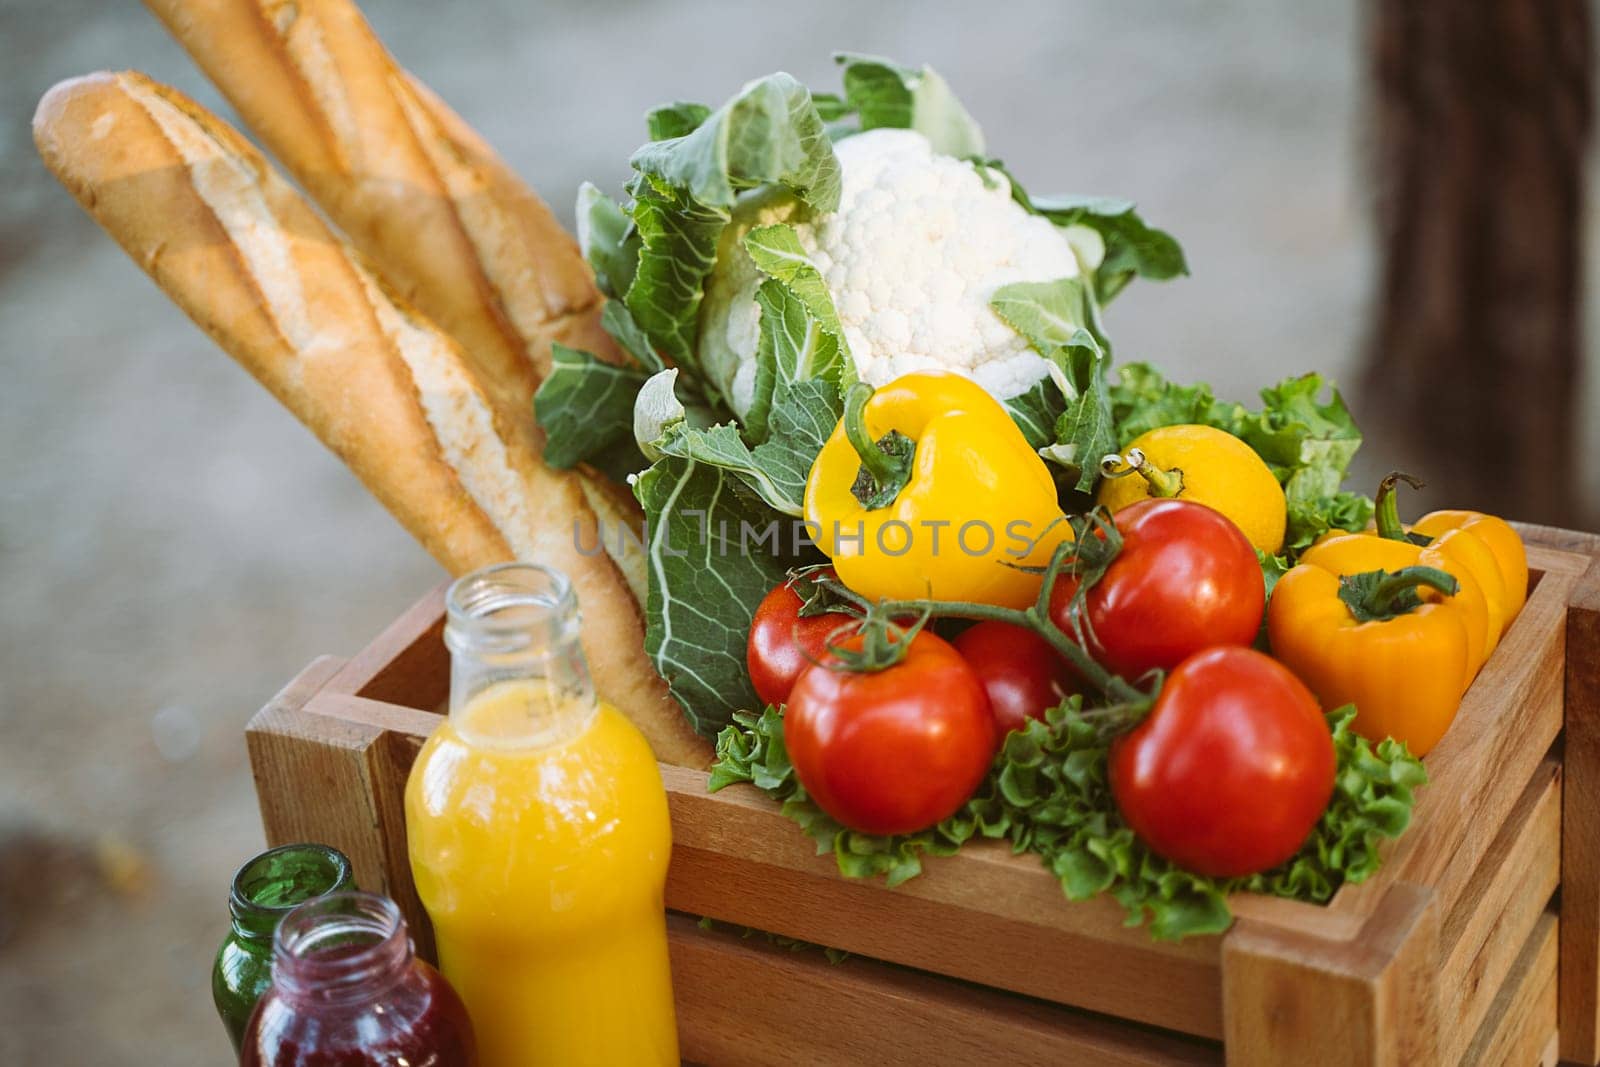 Wooden crate organic farmland vegetables, bread baguettes, fruits, multicolor juice bottles, croissants, dark wood table. Framed crate with cauliflower, sweet pepper, tomatoes, yellow quince, apples. by Ostanina